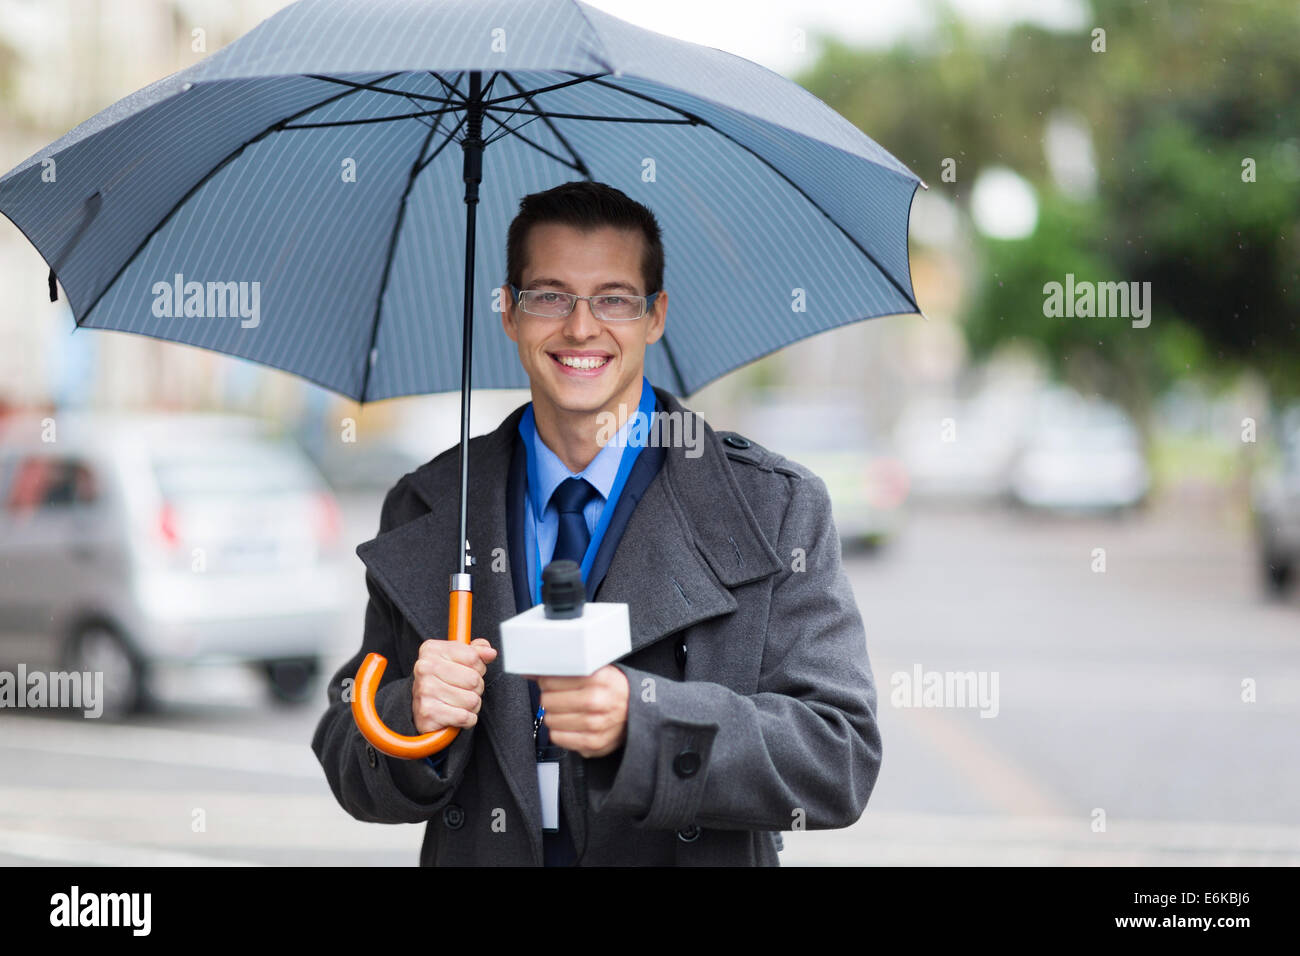 male news reporter holding umbrella and live broadcasting in the rain Stock Photo